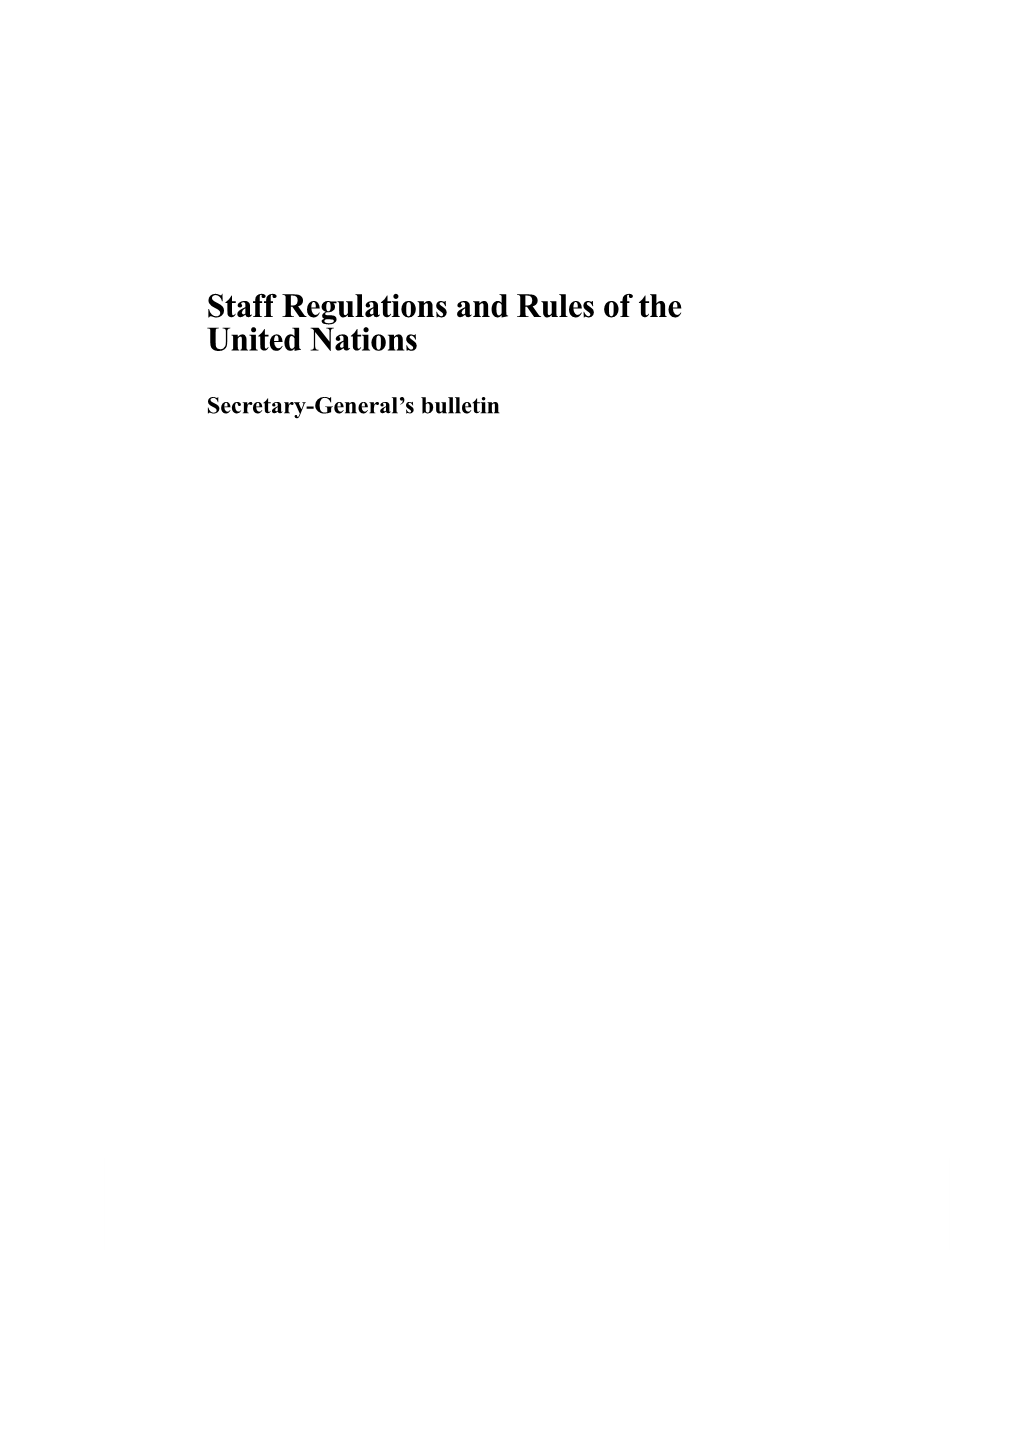 Staff Regulations and Rules of the Unitednations